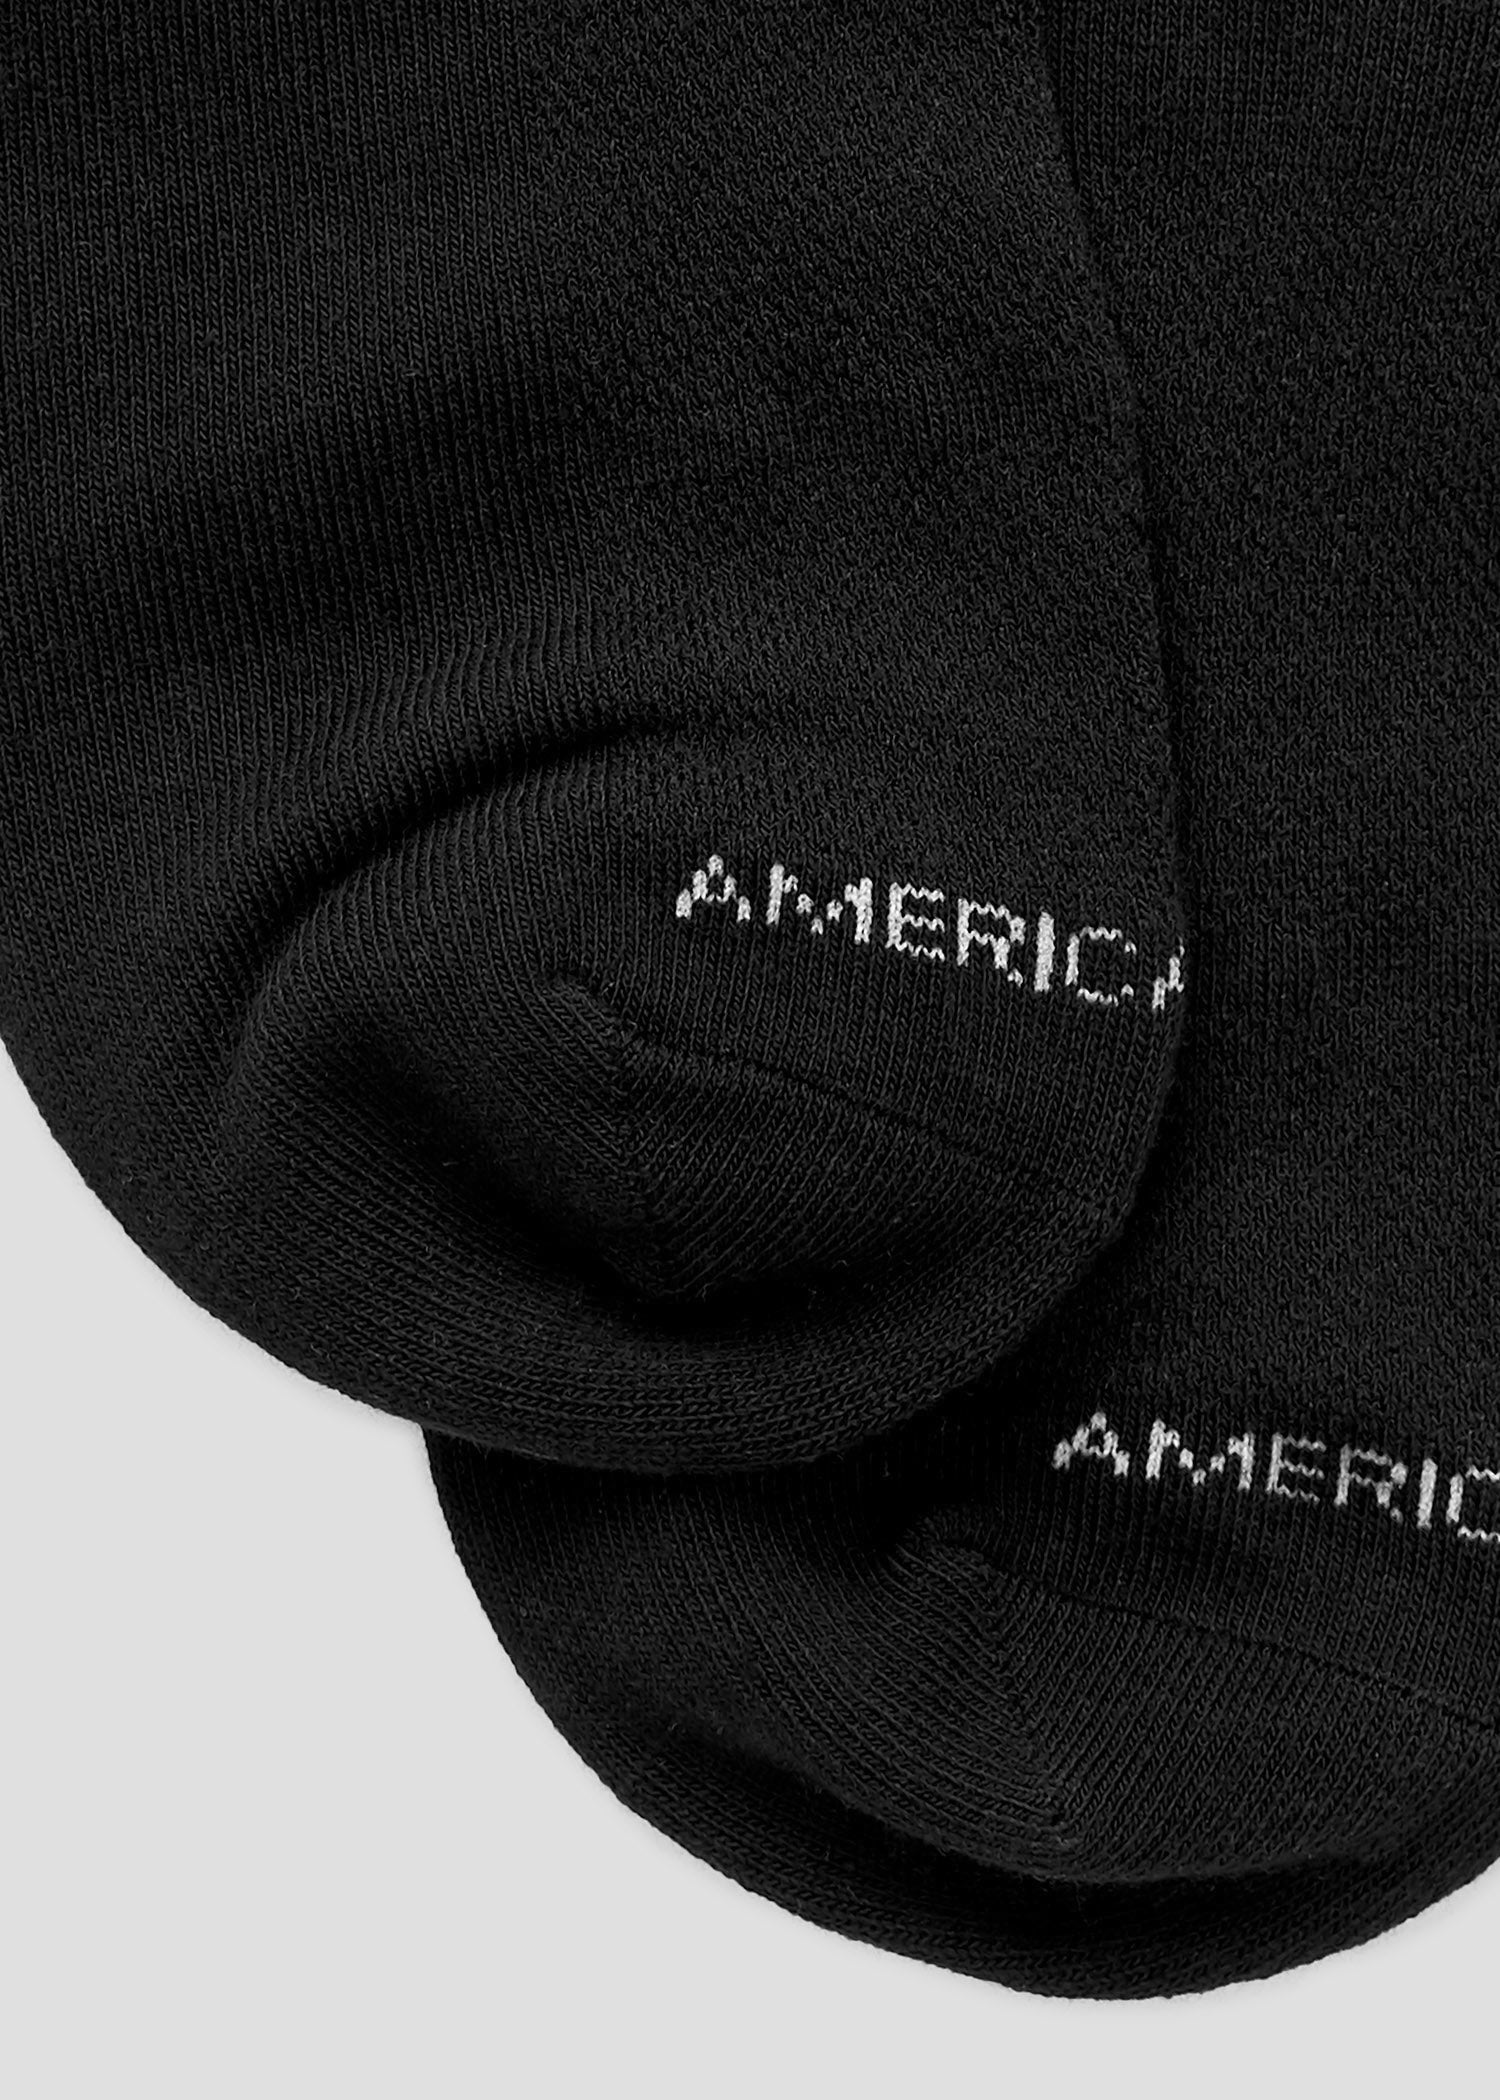       American-Tall-Mens-Athletic-Mid-Ankle-Socks-X-Large-Size-14-17-Black-3-Pack-Detail